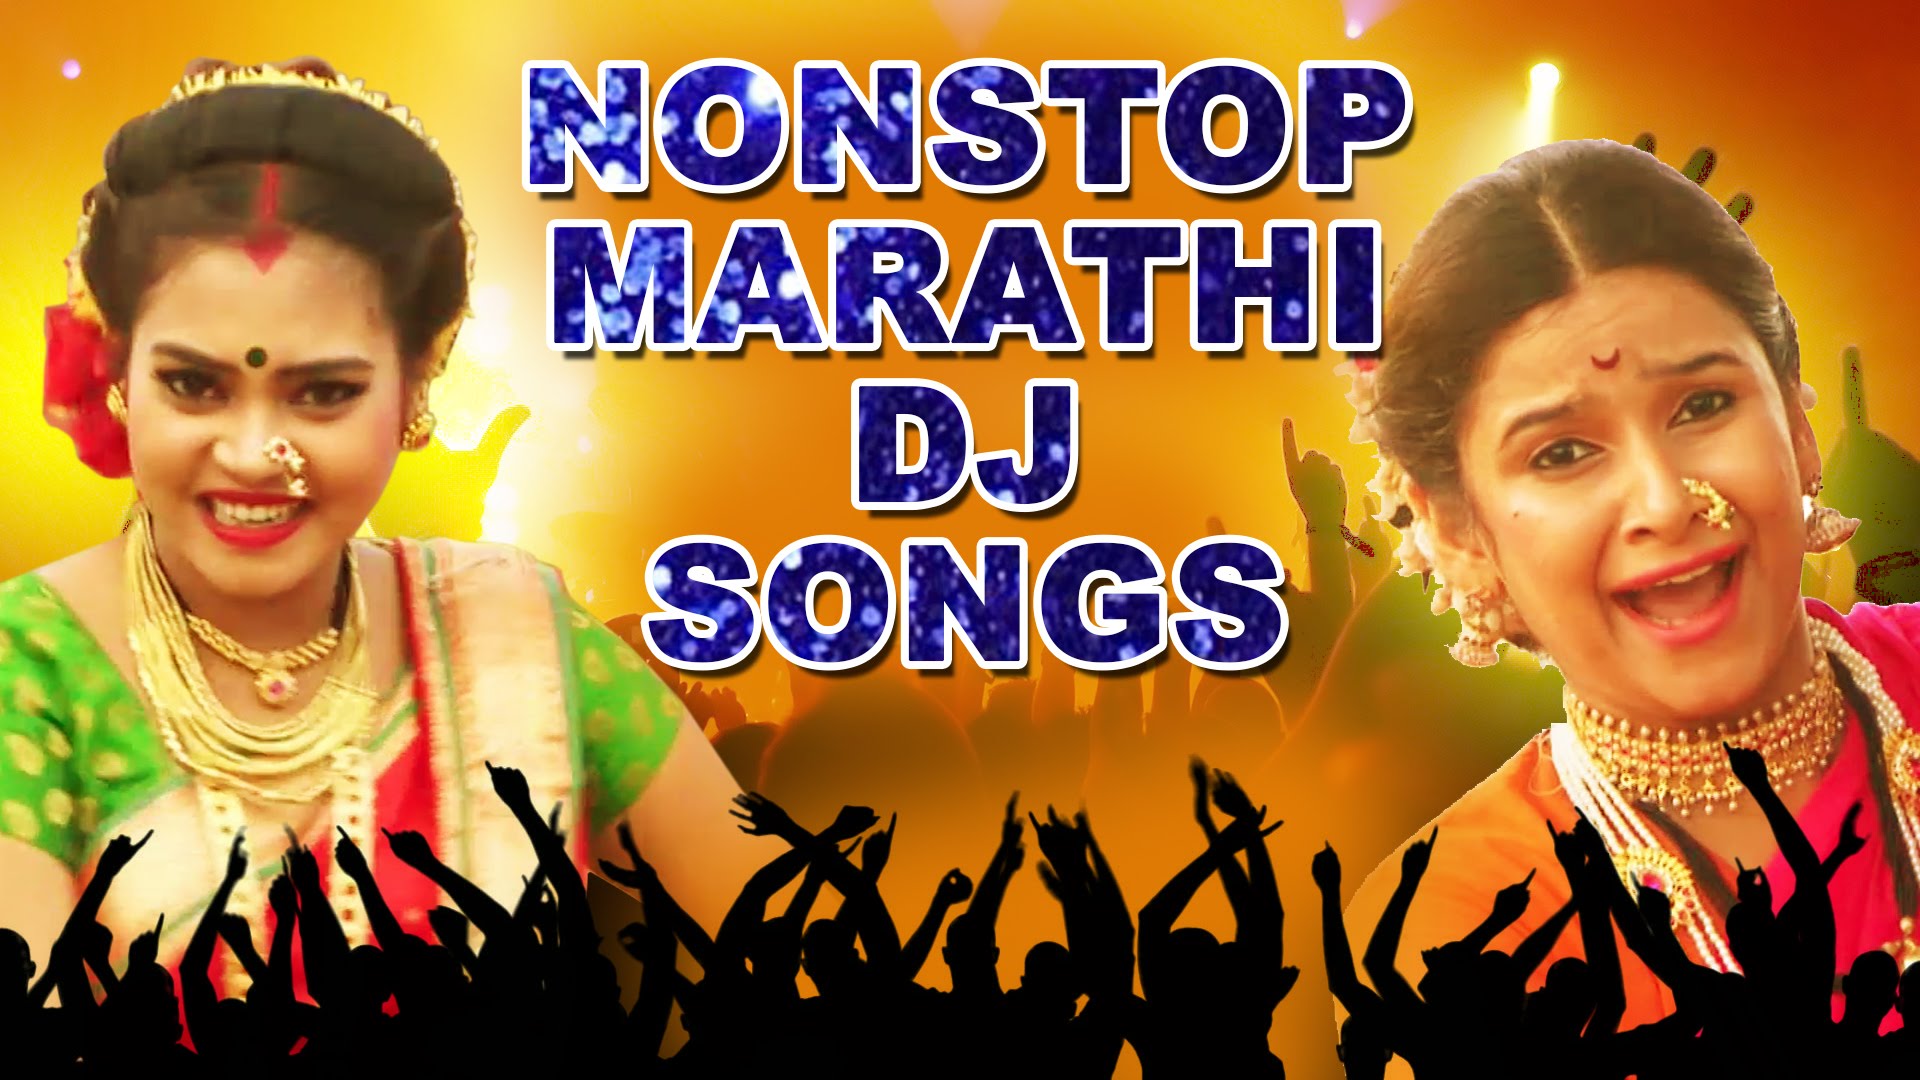 soft mp3 song download